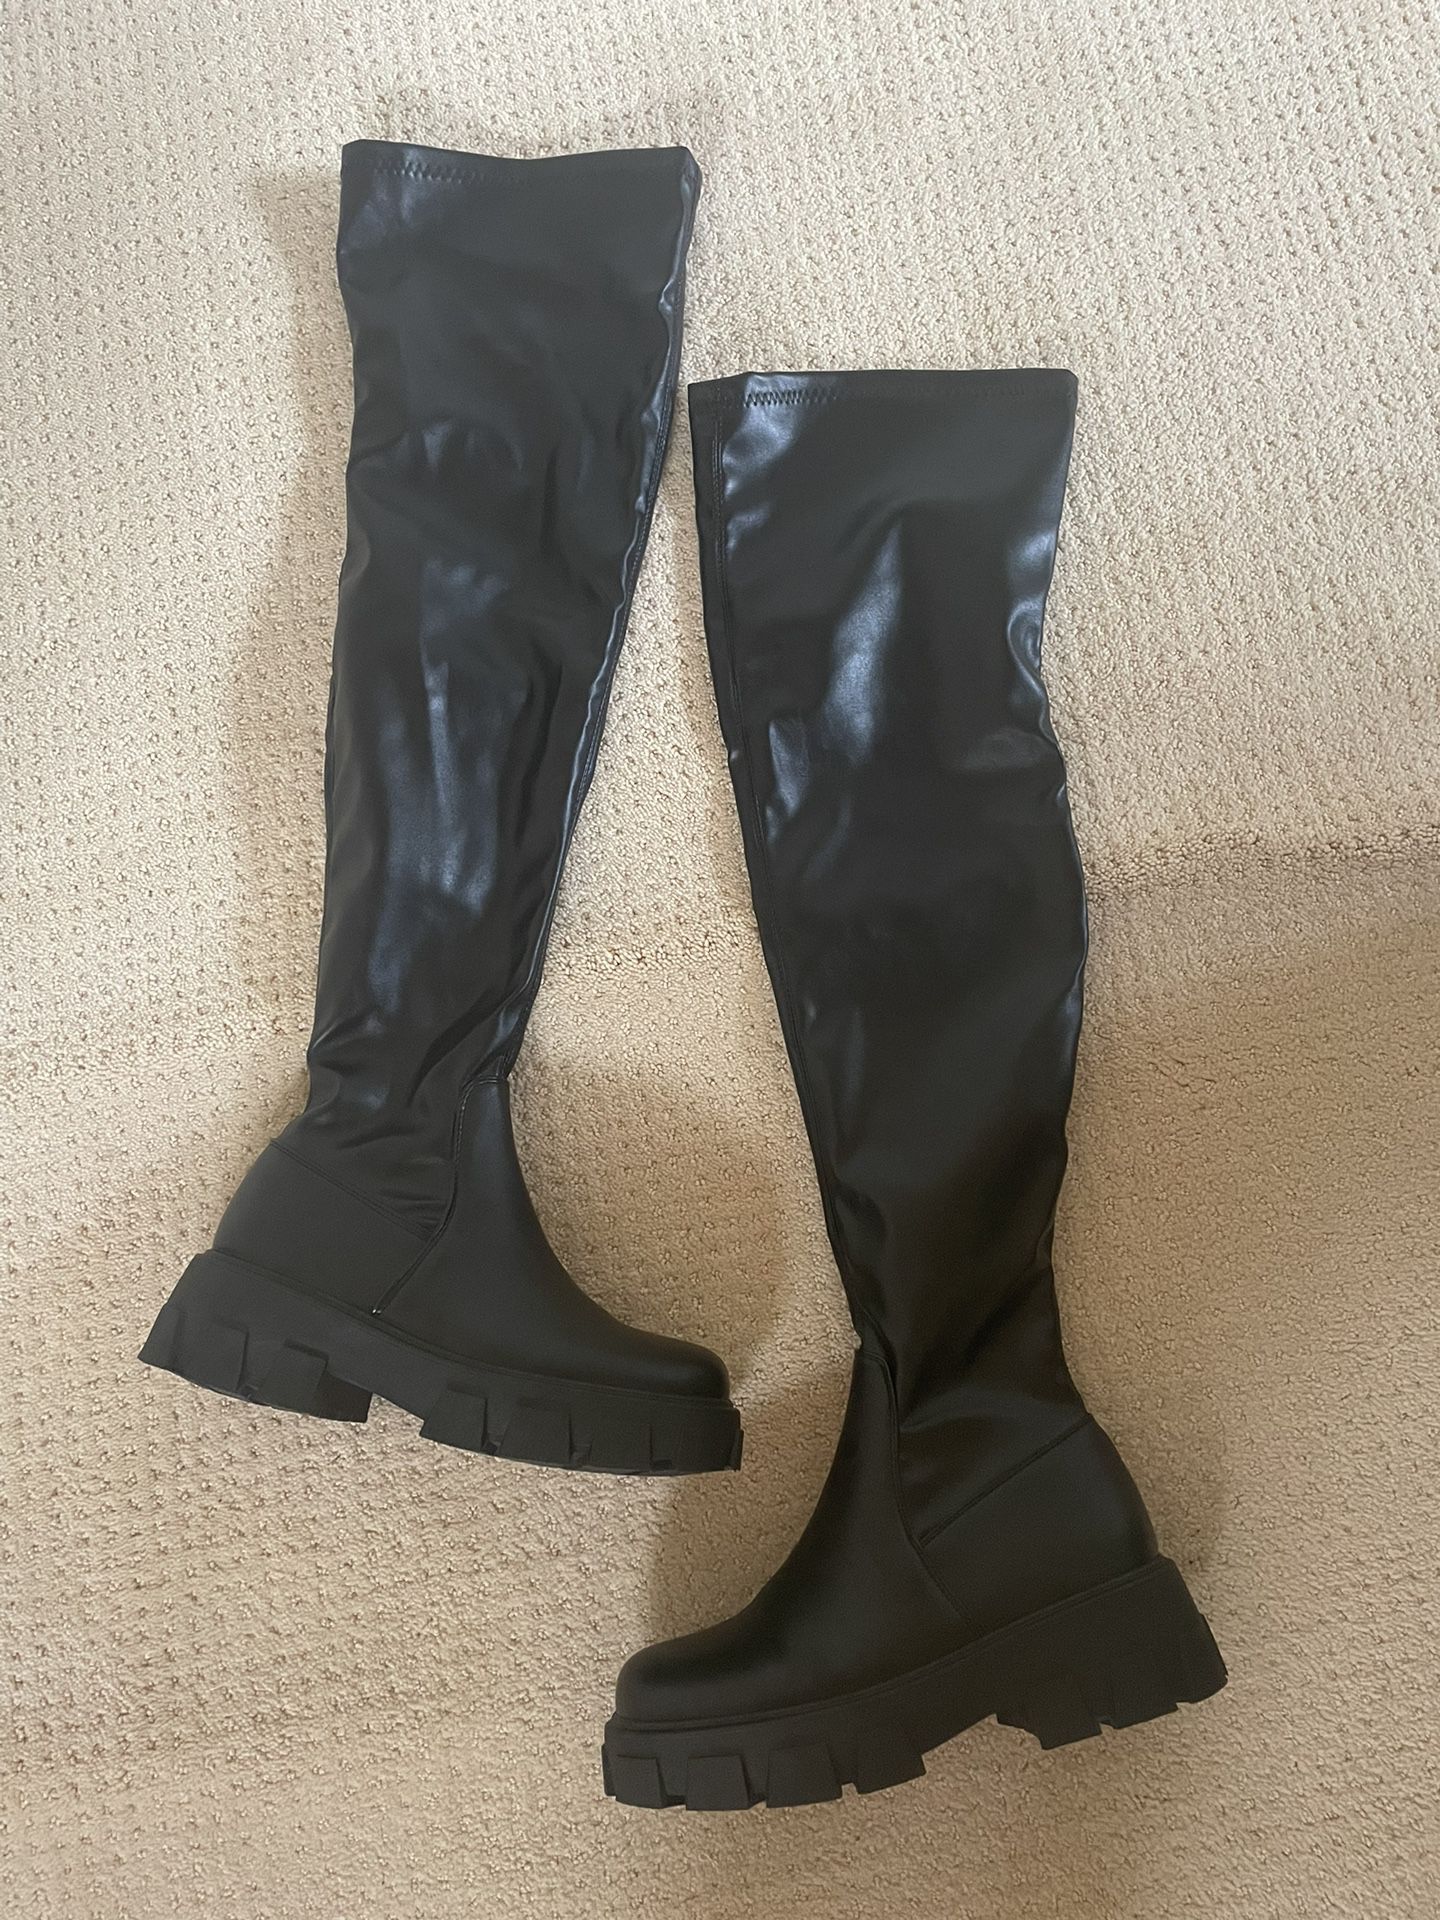 Thigh High Boots Size 10